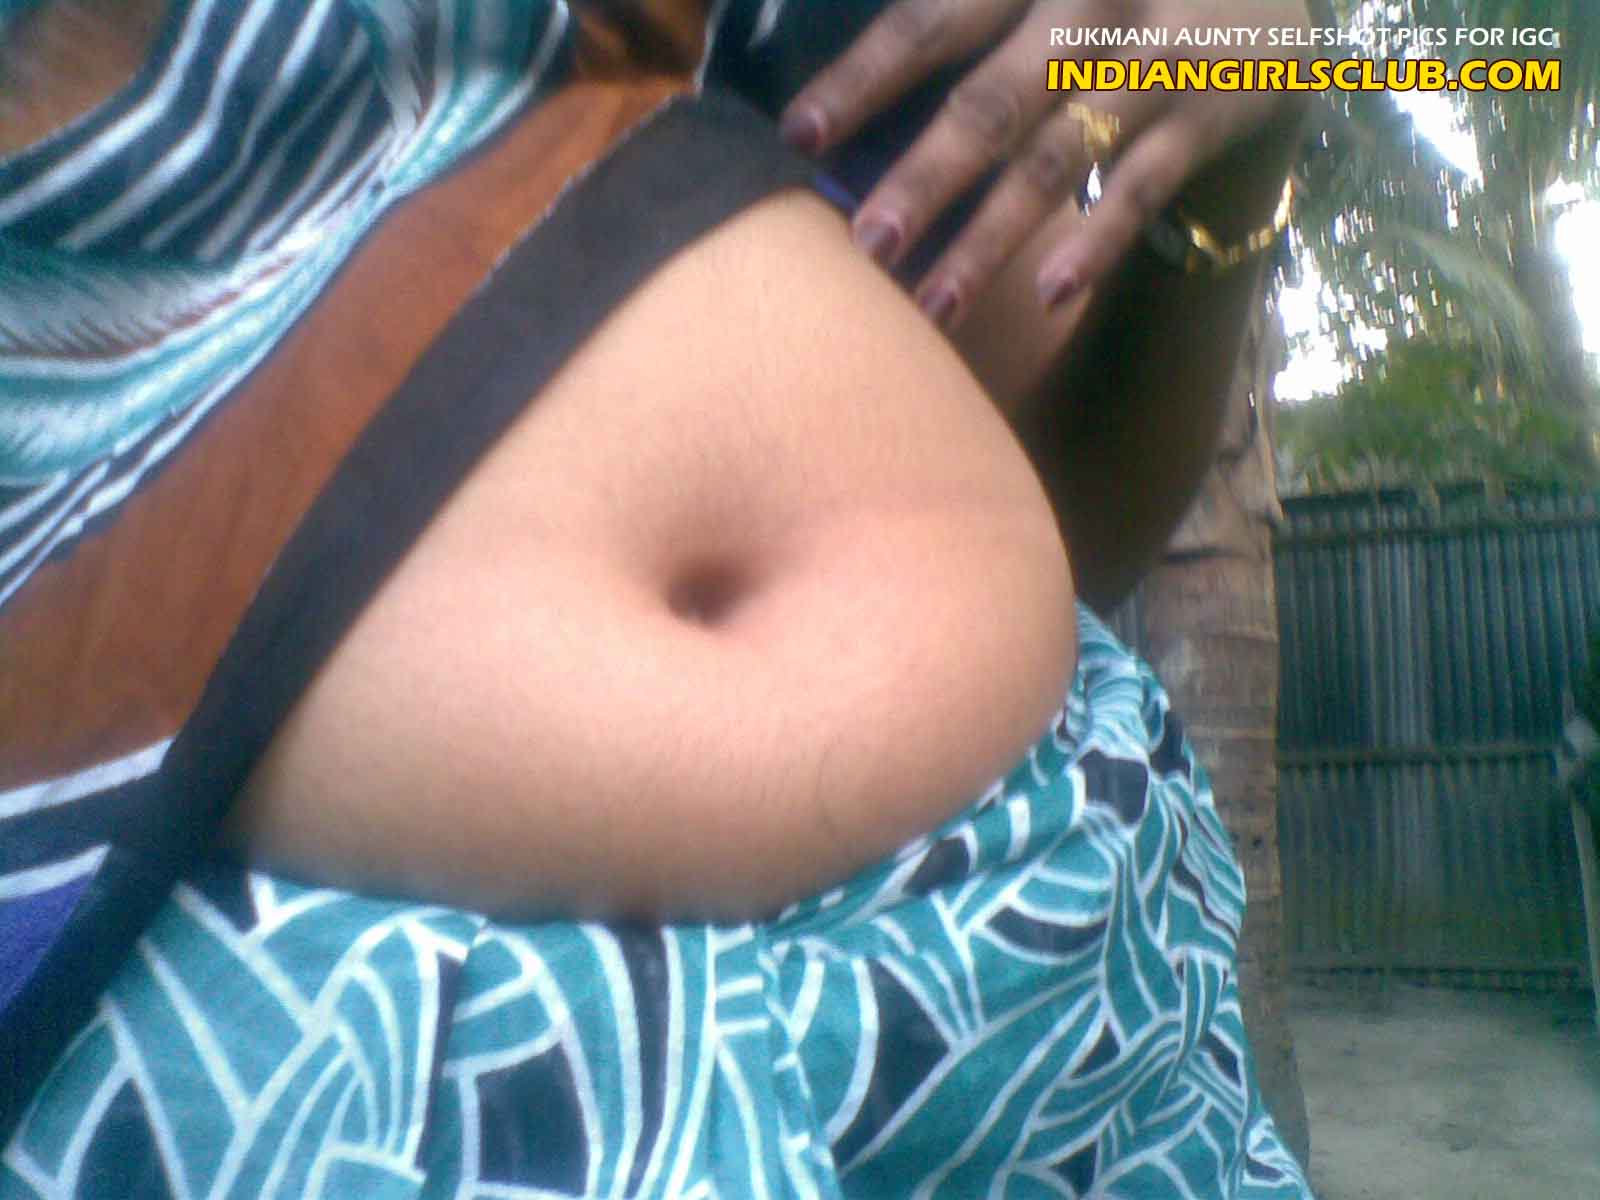 Nude Indian Big Belly Aunties - 2 indian aunty navel pics - Indian Girls Club - Nude Indian Girls & Hot Sexy  Indian Babes